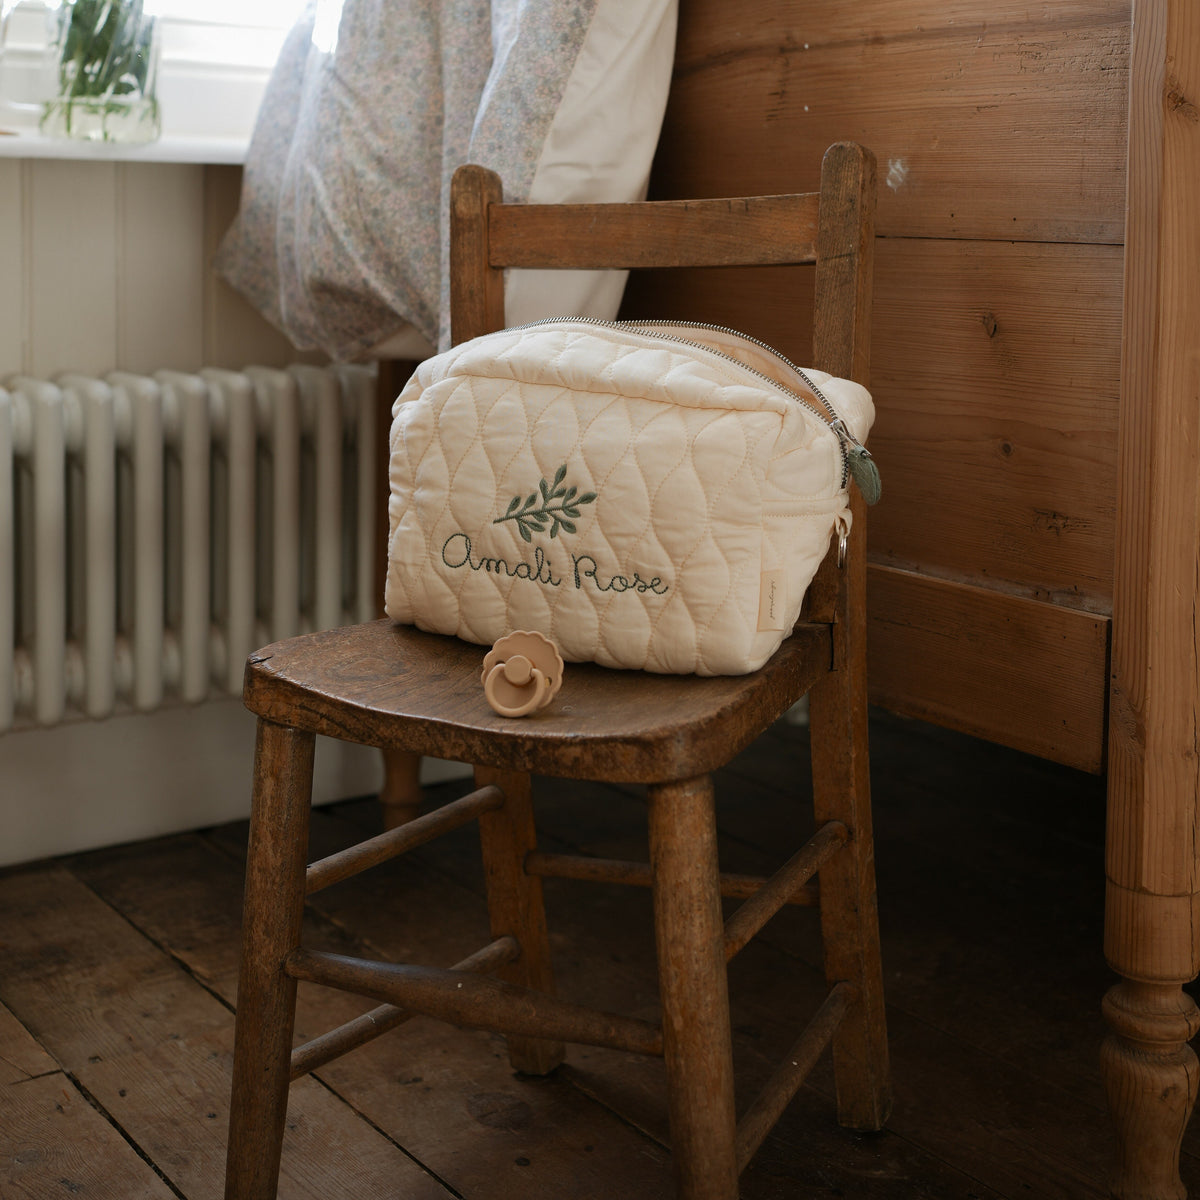 Toiletry Pouch in Ivory sitting on top of wooden chair with wooden dresser in the background